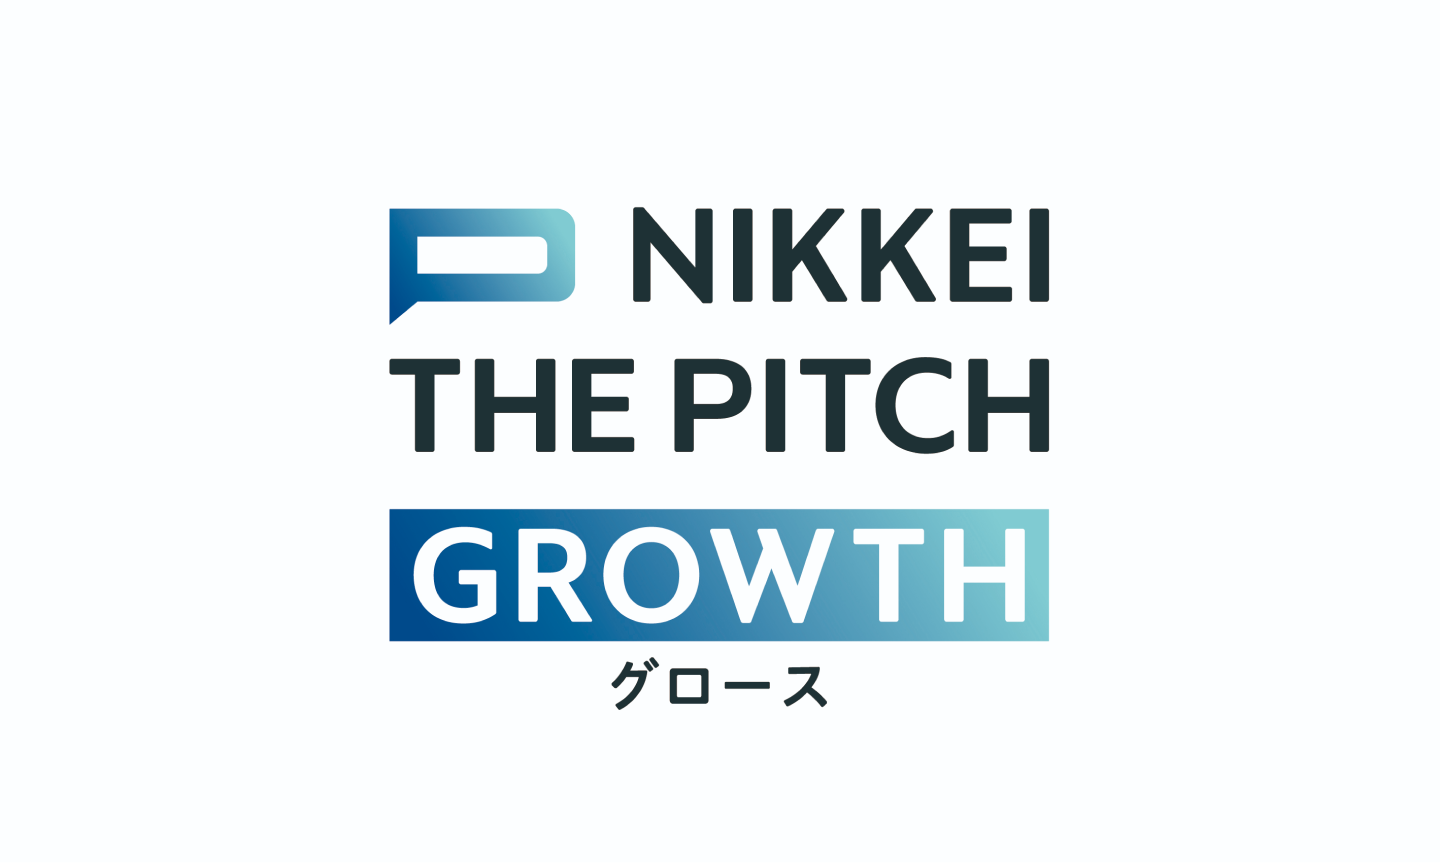 NIKKEI THE PITCH GROWTH